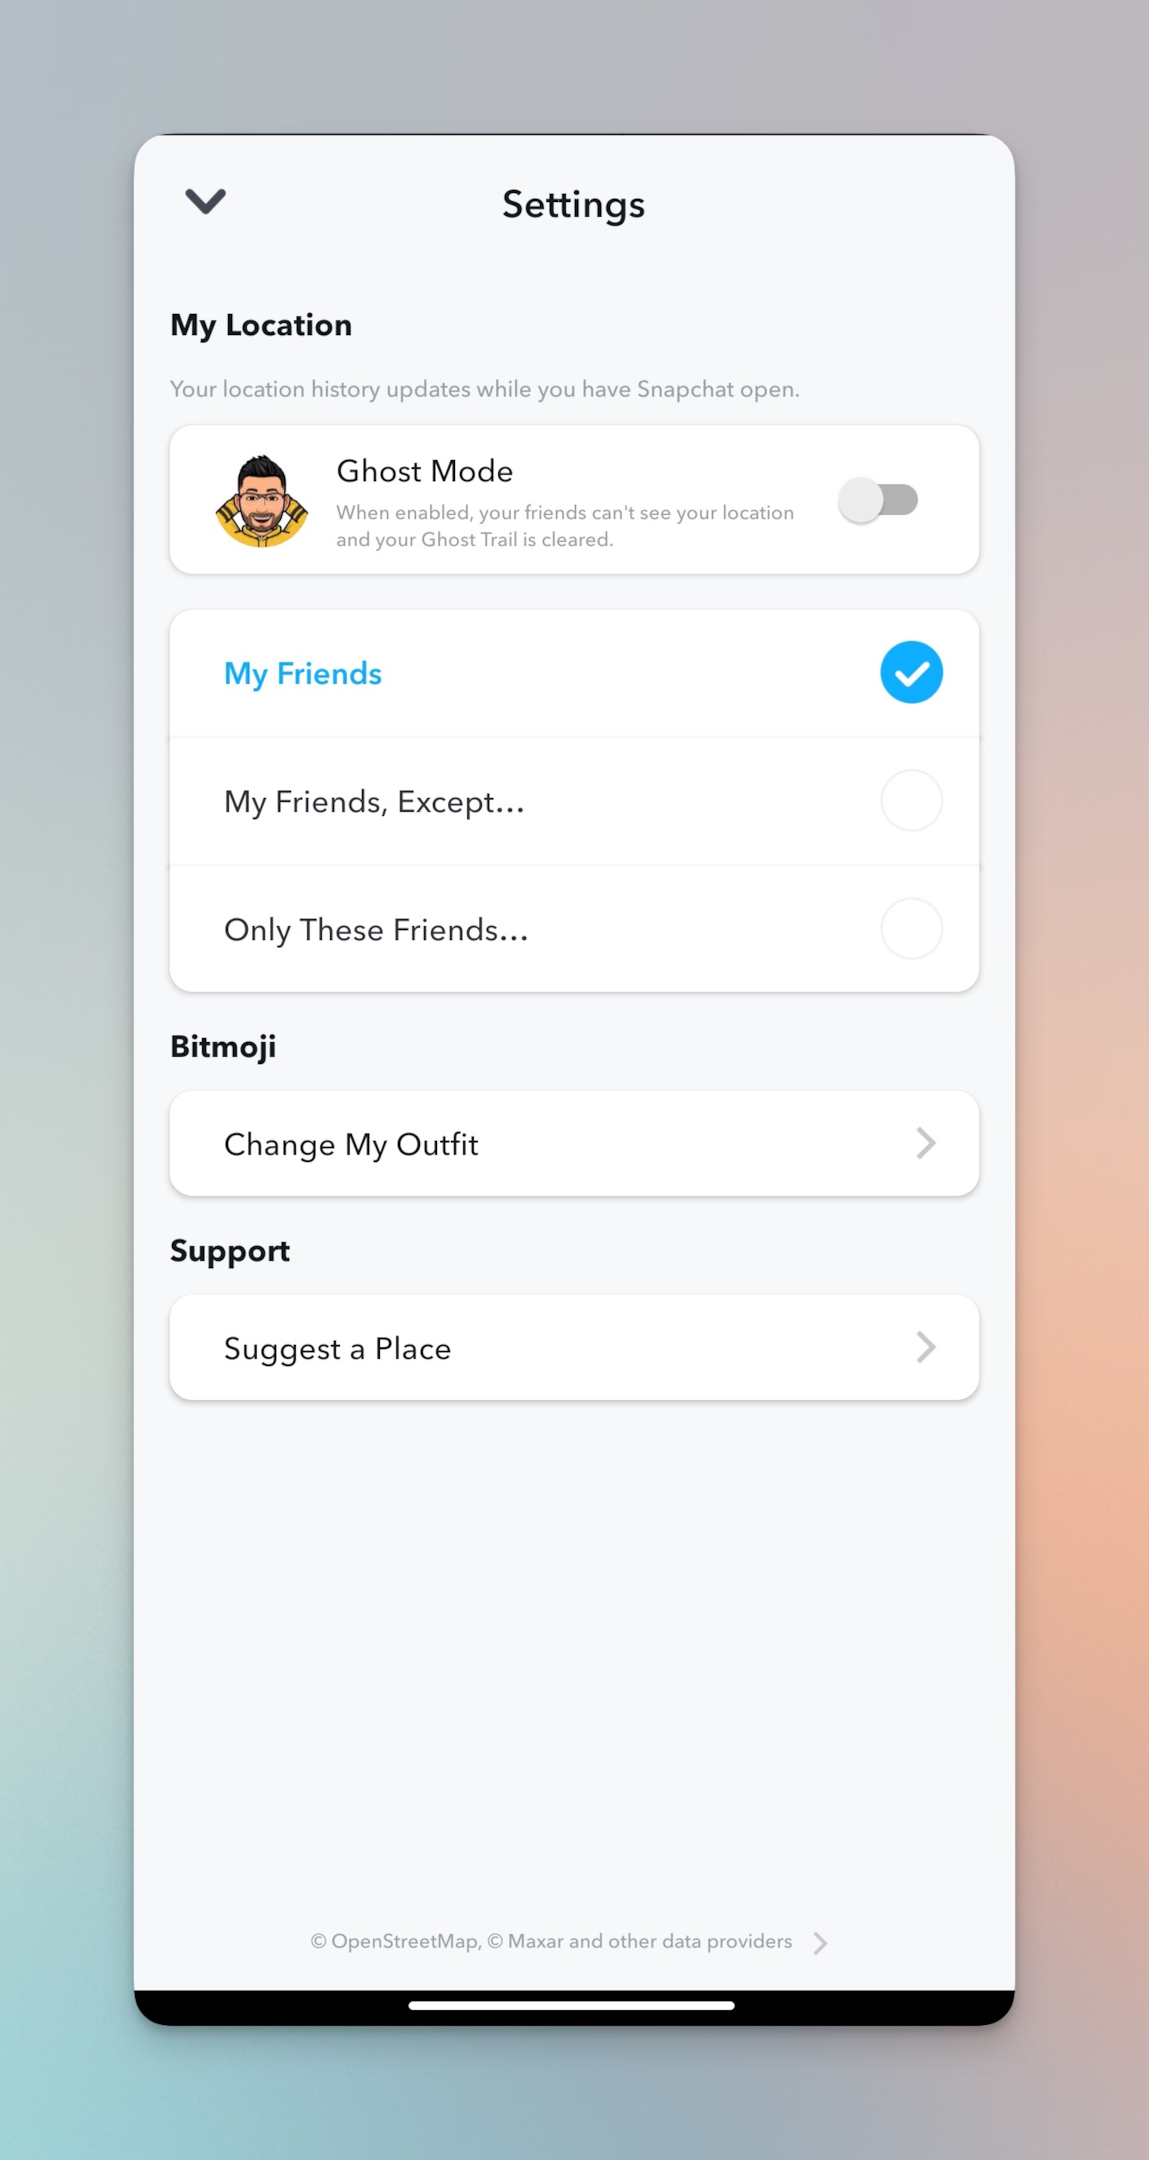 Remote.tools shows the settings page to control location settings including ghost mode. While you're on ghost mode, even your friends will not be able to request location